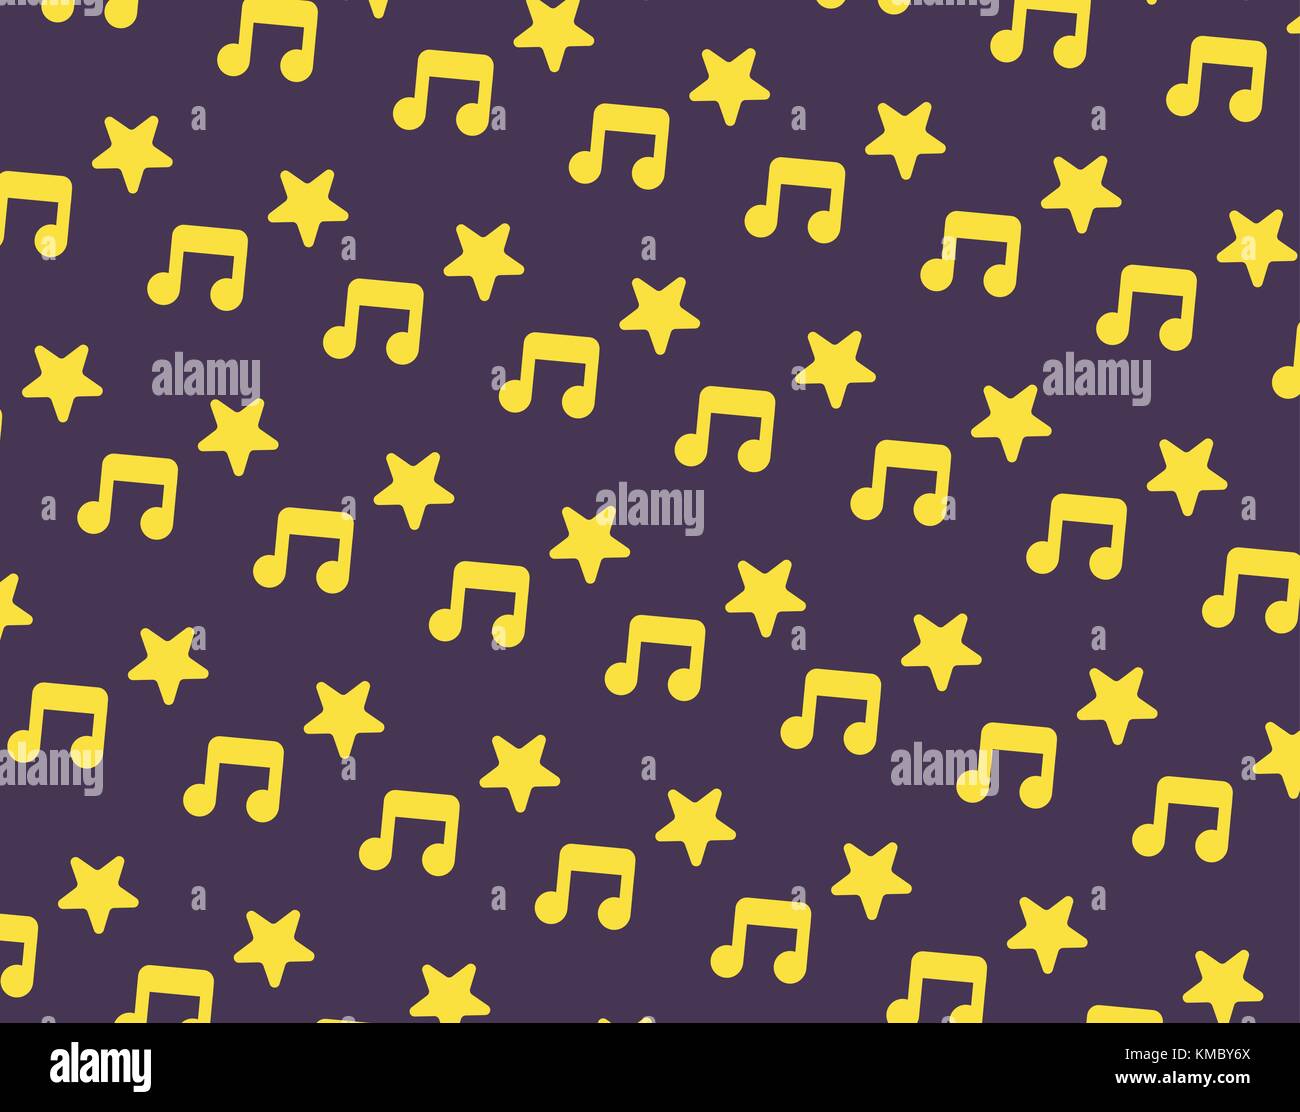 Yellow music and star icon pattern on dark purple background vector Stock Vector